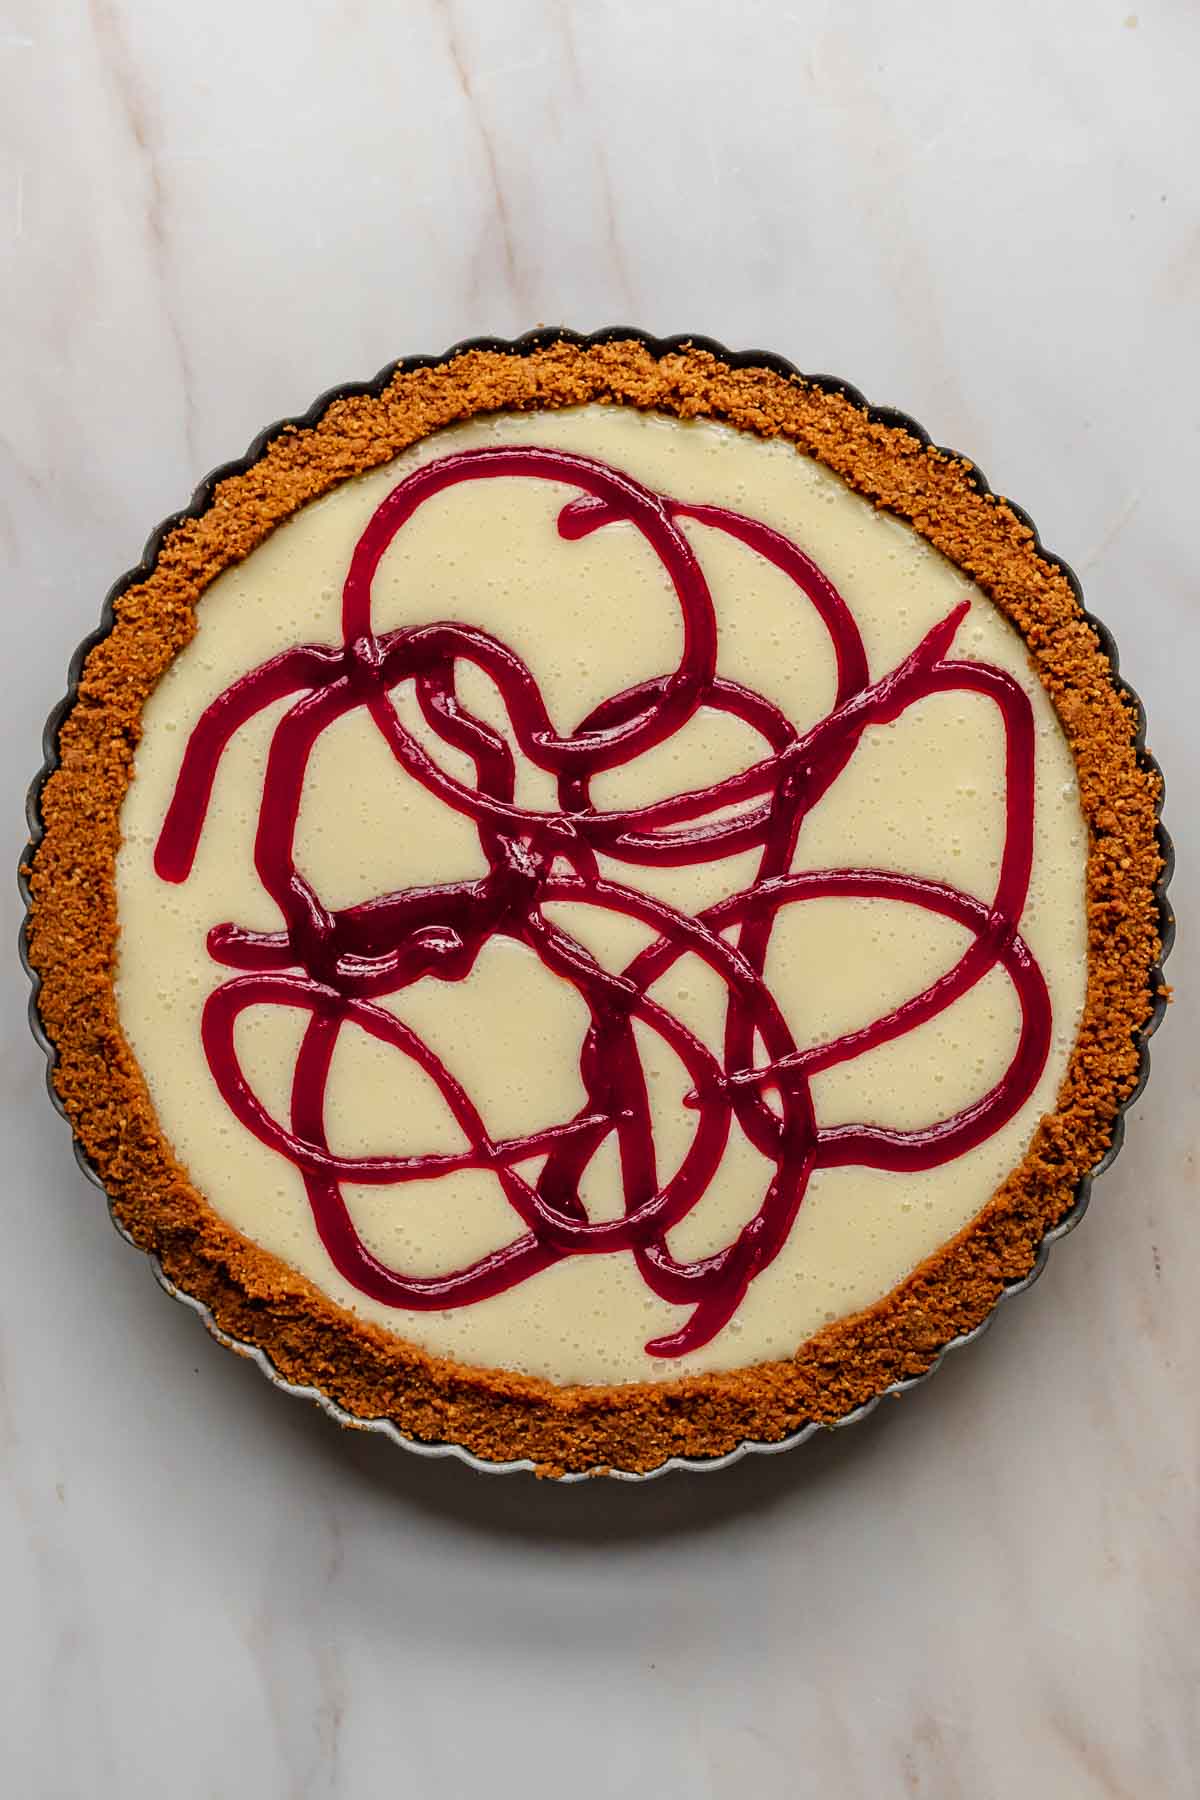 Cranberry swirls piped into the top of white chocolate tart.